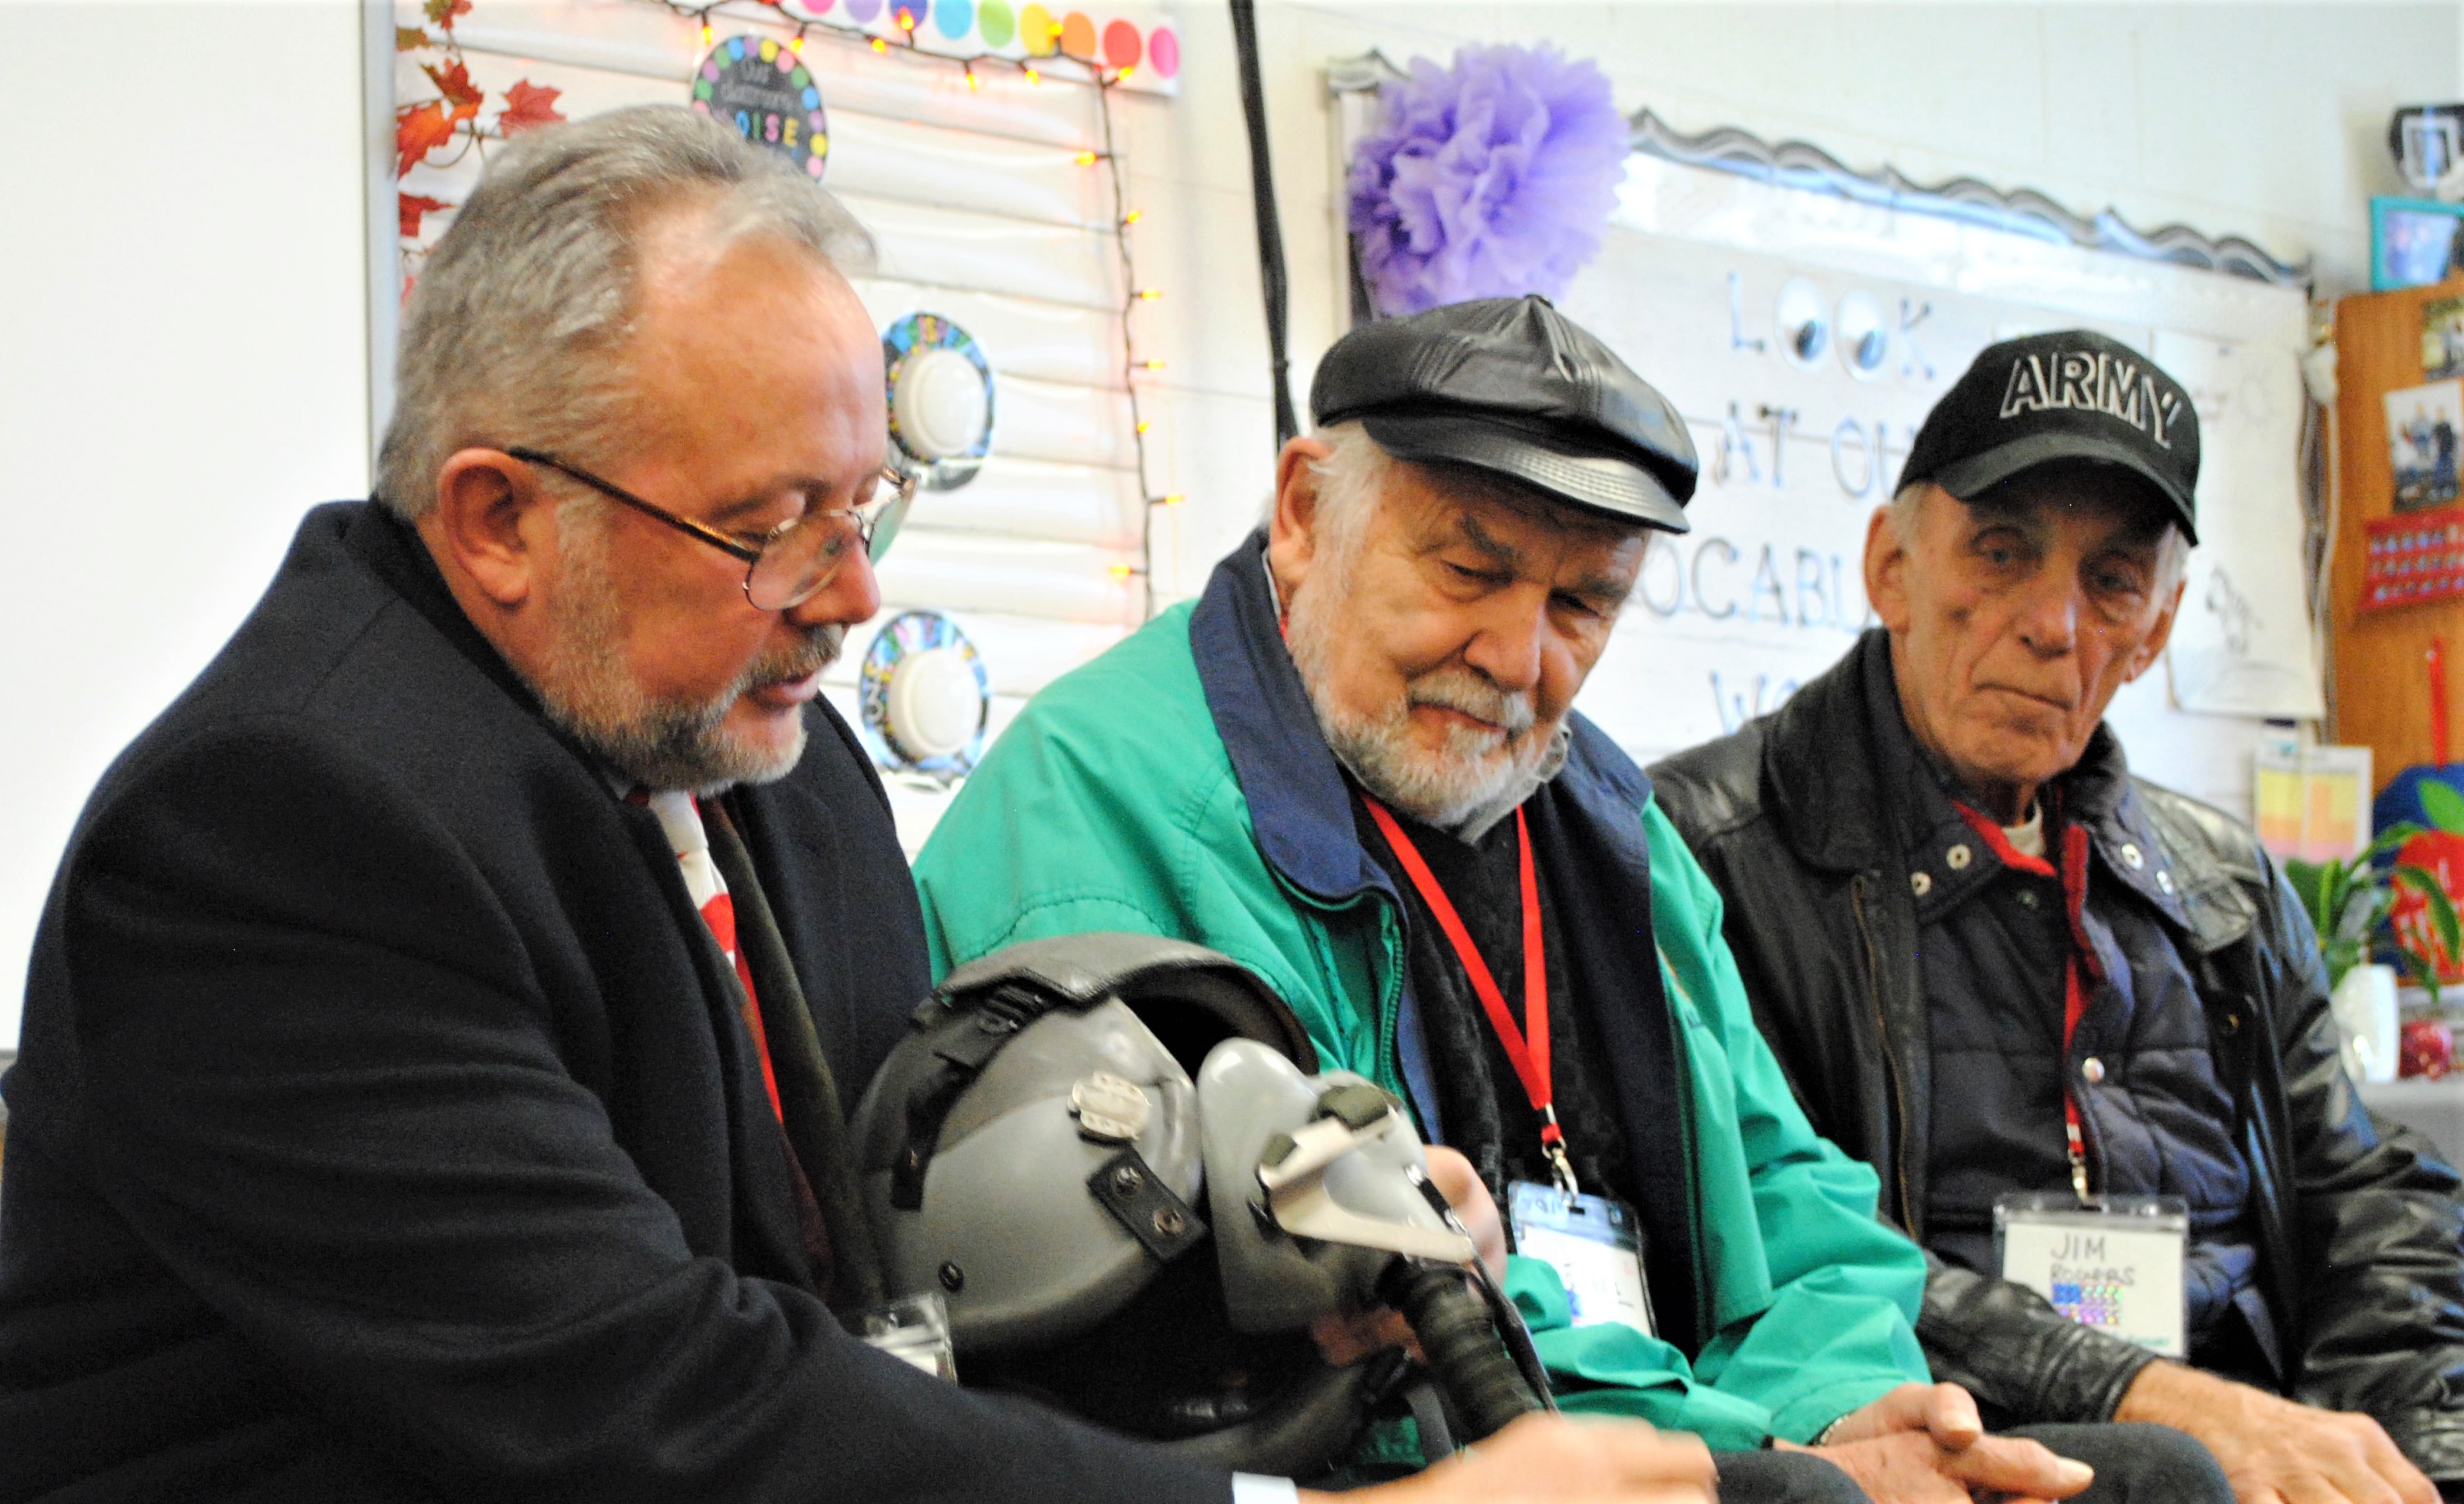 While some came with memories, others came with mementoes from their time in the service for students to see. Greg Gonyea had his air helmet and parachute pack in tow for a class of second-graders to put their hand on. With him is veterans Lloyd Schmaltz and Jim Rogers. Photo by Shelby Tankersley.